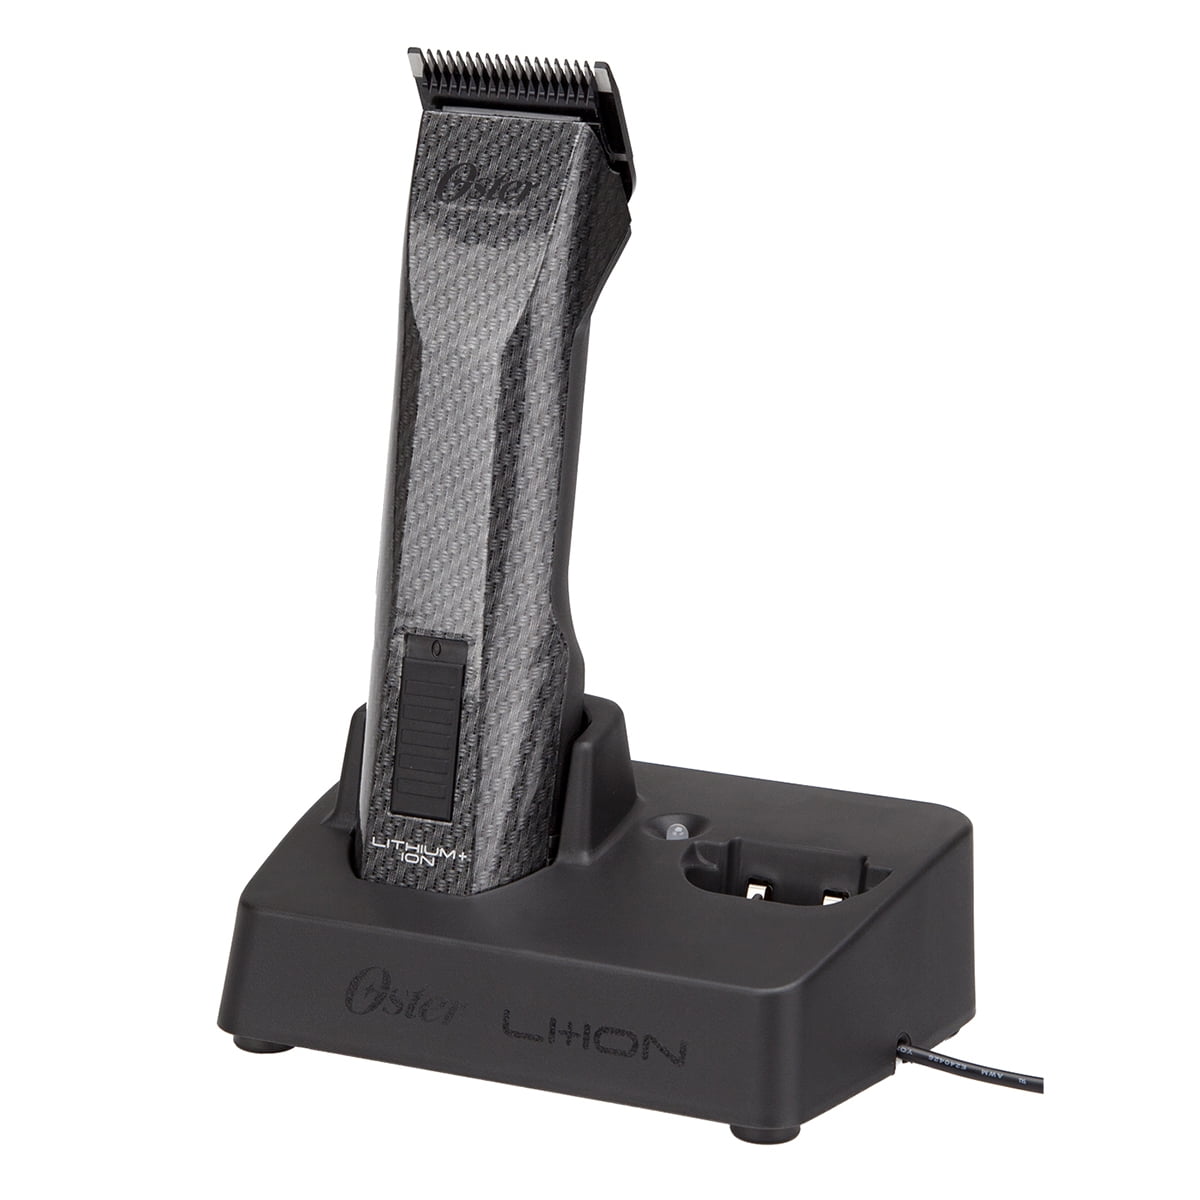 oster lithium ion clippers